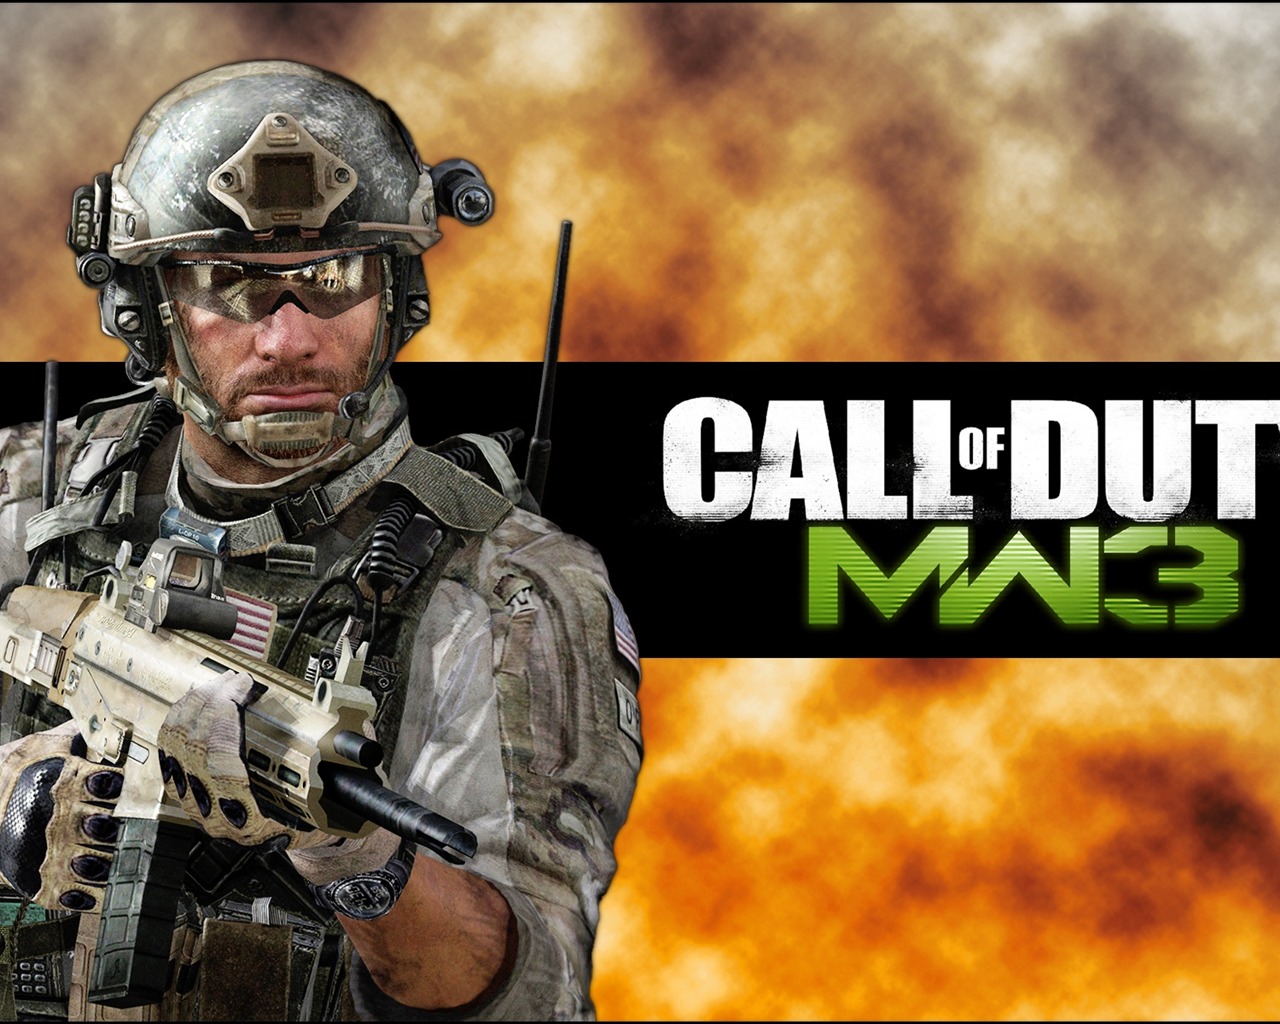 Call of Duty: MW3 wallpapers HD #14 - 1280x1024